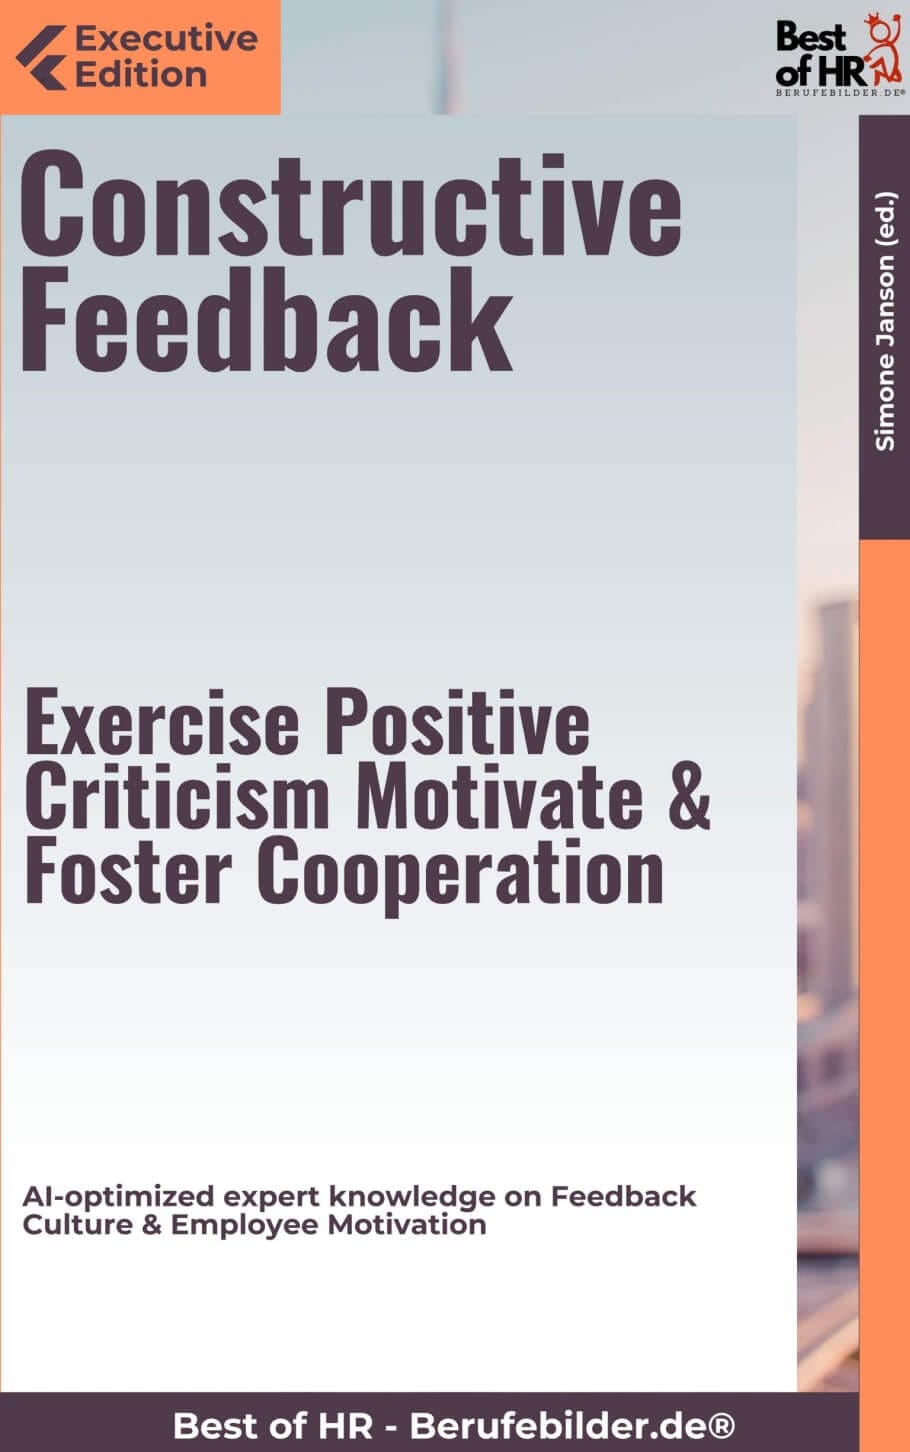 Constructive Feedback – Exercise Positive Criticism, Motivate, & Foster Cooperation (Engl. Version)